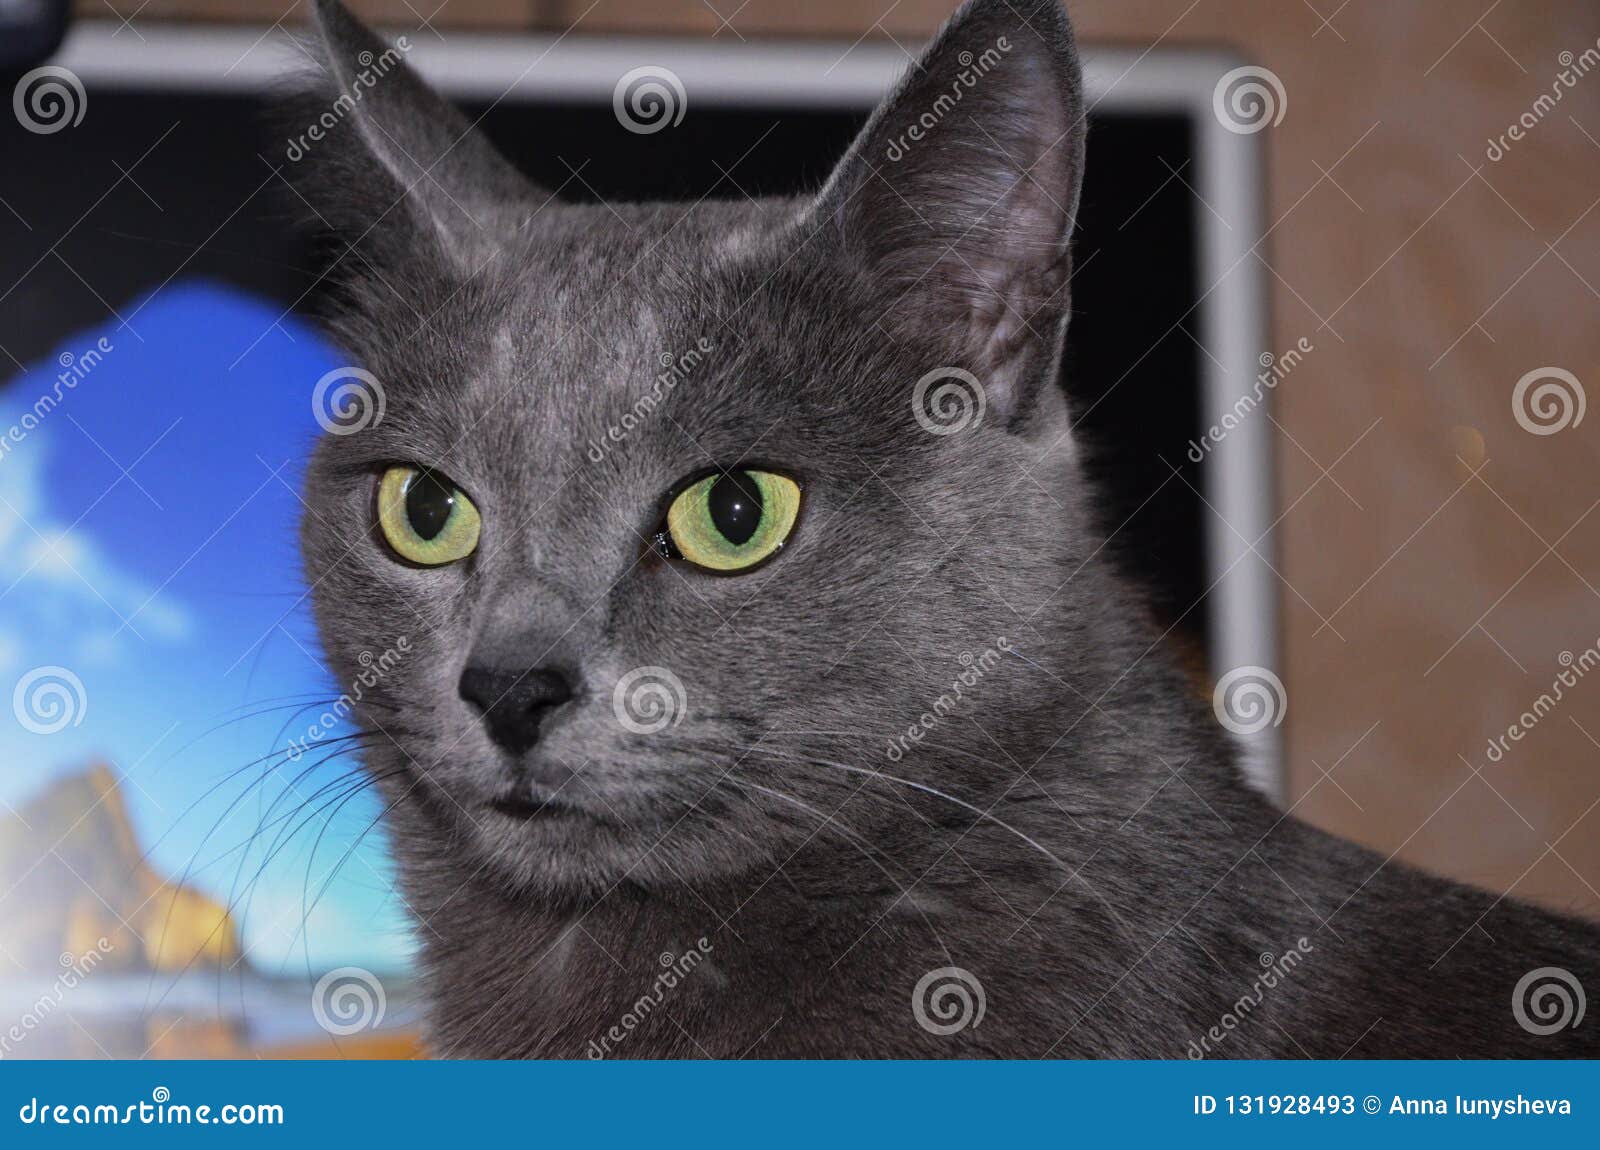 The Beautiful Cat Breed Russian Blue With Silver Coat And Pointed Ears Large Moustache Pet Stock Image Image Of Eyes Pretty 131928493